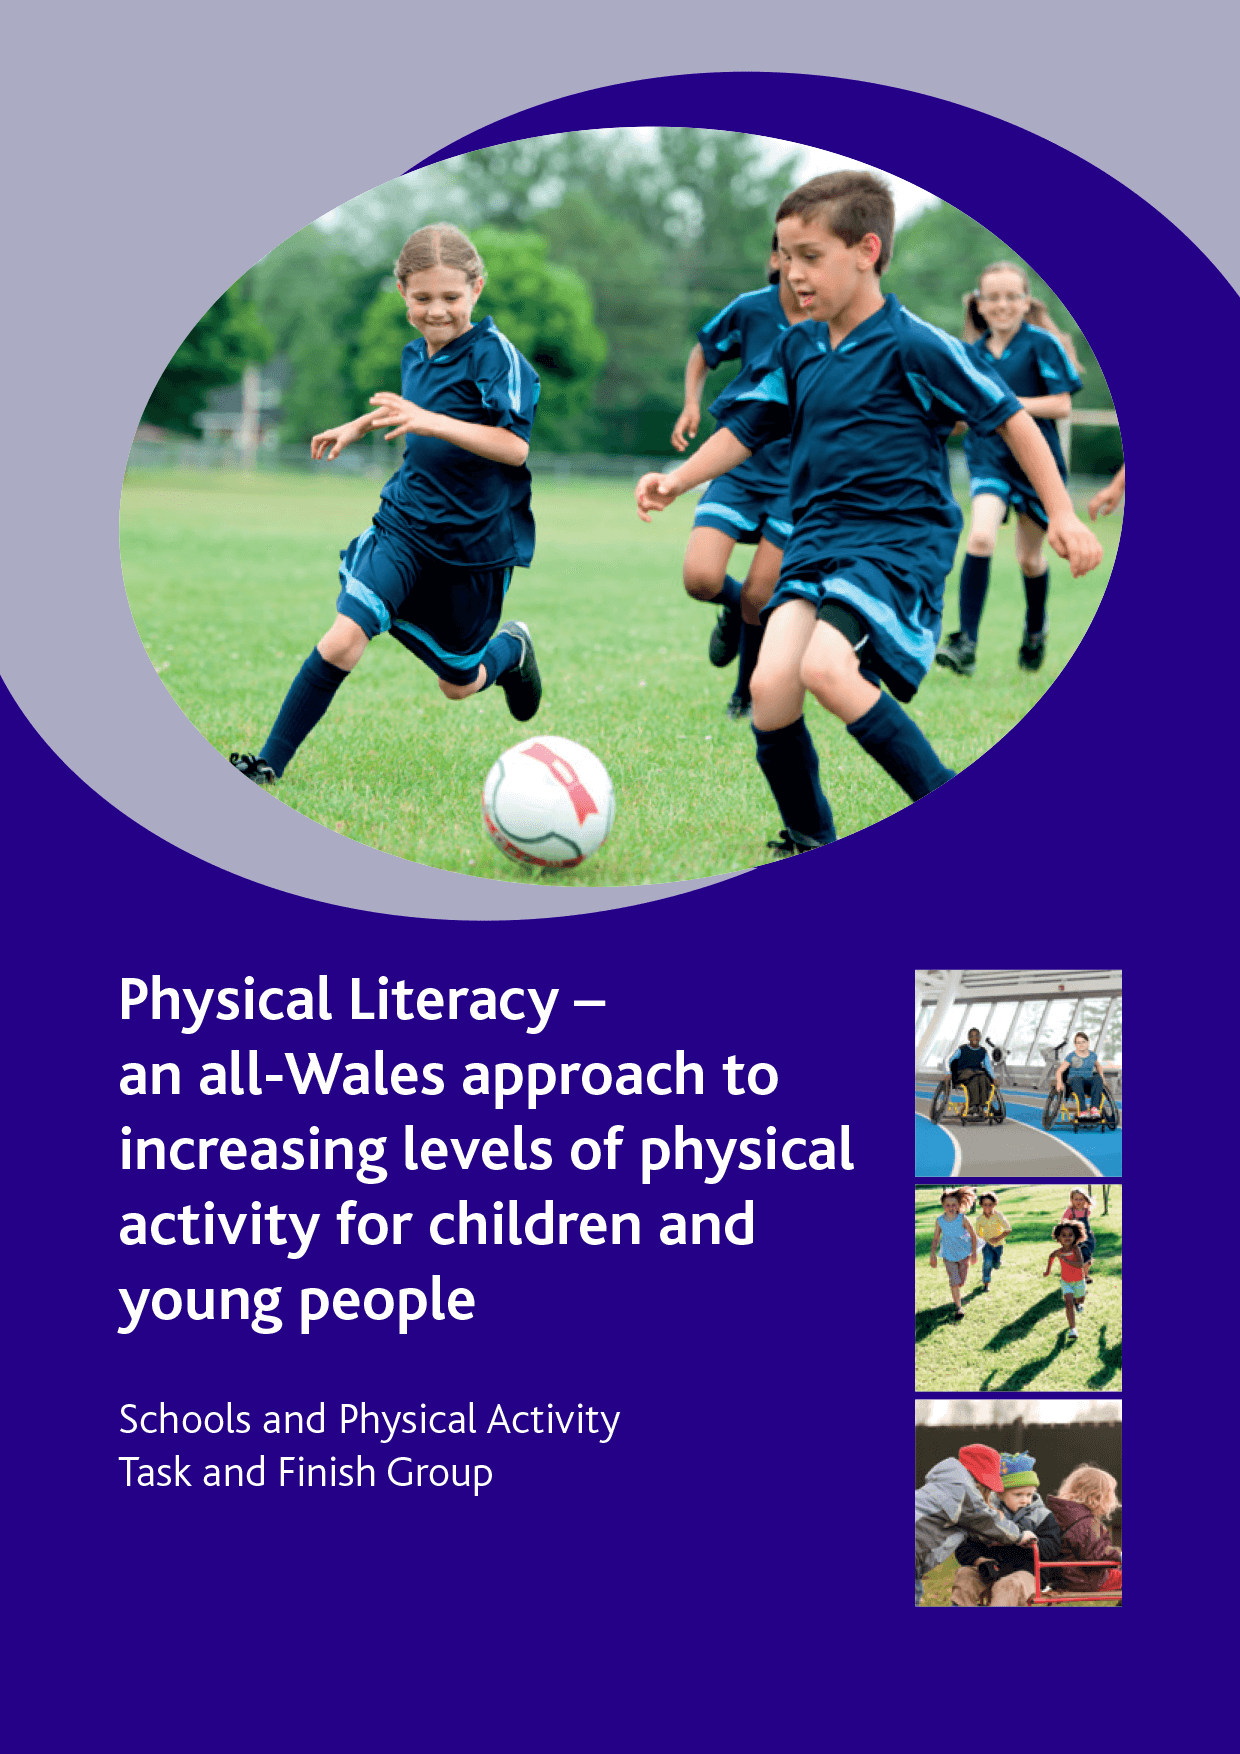 Physical Literacy – an all-Wales approach to increasing levels of physical activity for children and young people